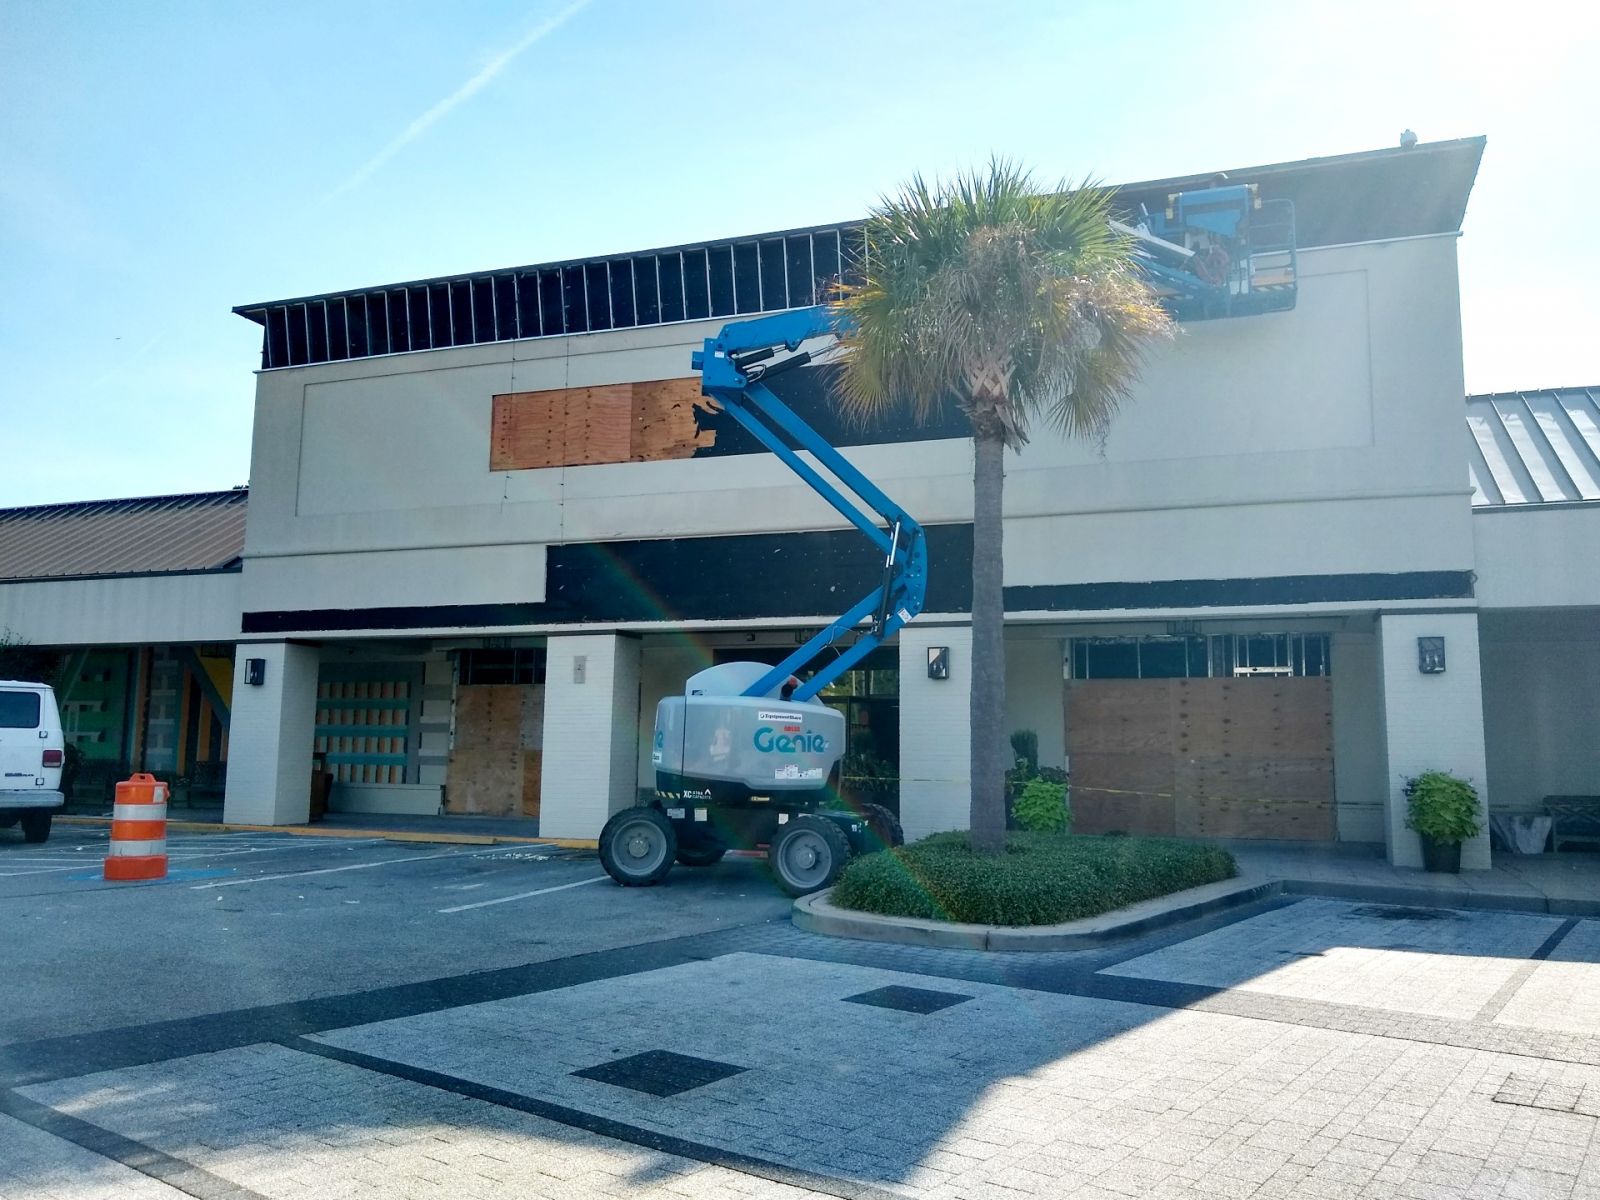 Two new tenants will soon occupy the Trenholm Plaza space vacated by Stein Mart. (Photo/Christina Lee Knauss)